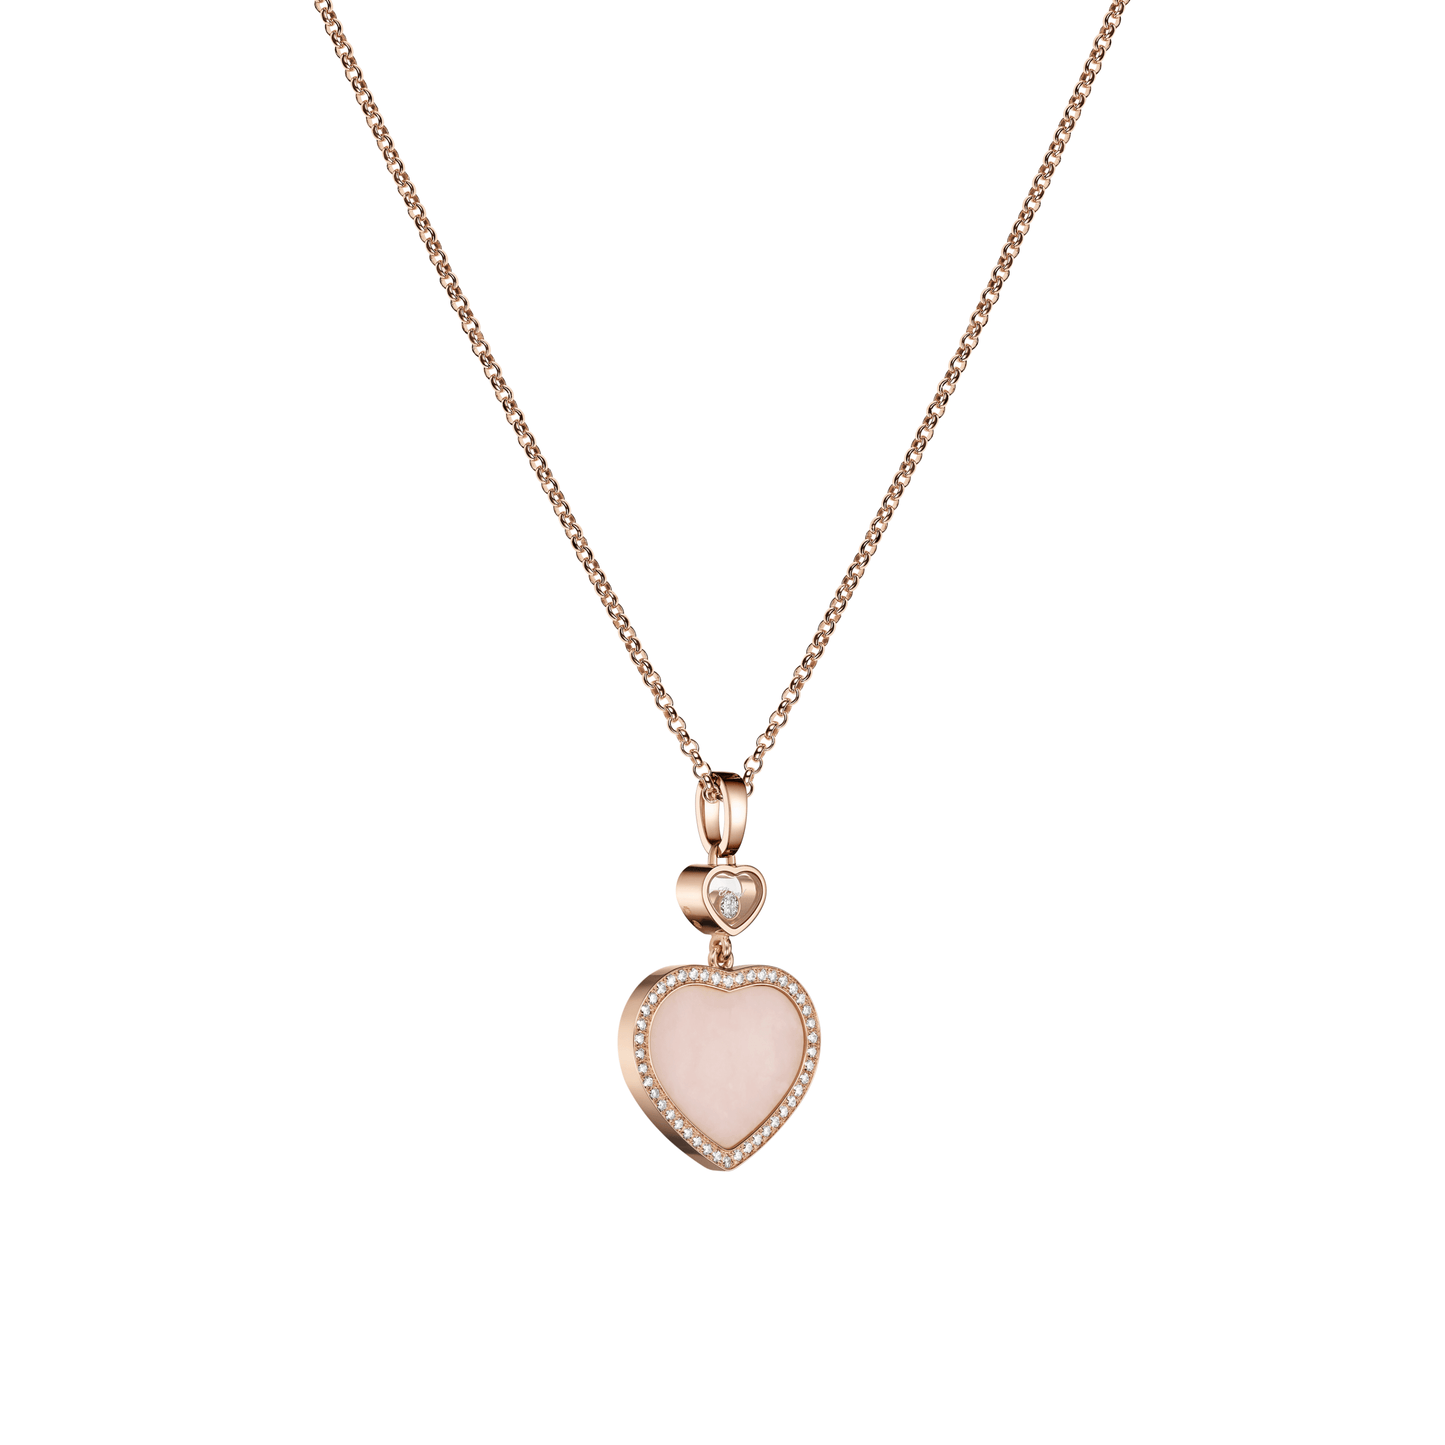 HAPPY HEARTS PENDANT, ETHICAL ROSE GOLD, DIAMONDS, PINK OPAL 79A074-5620